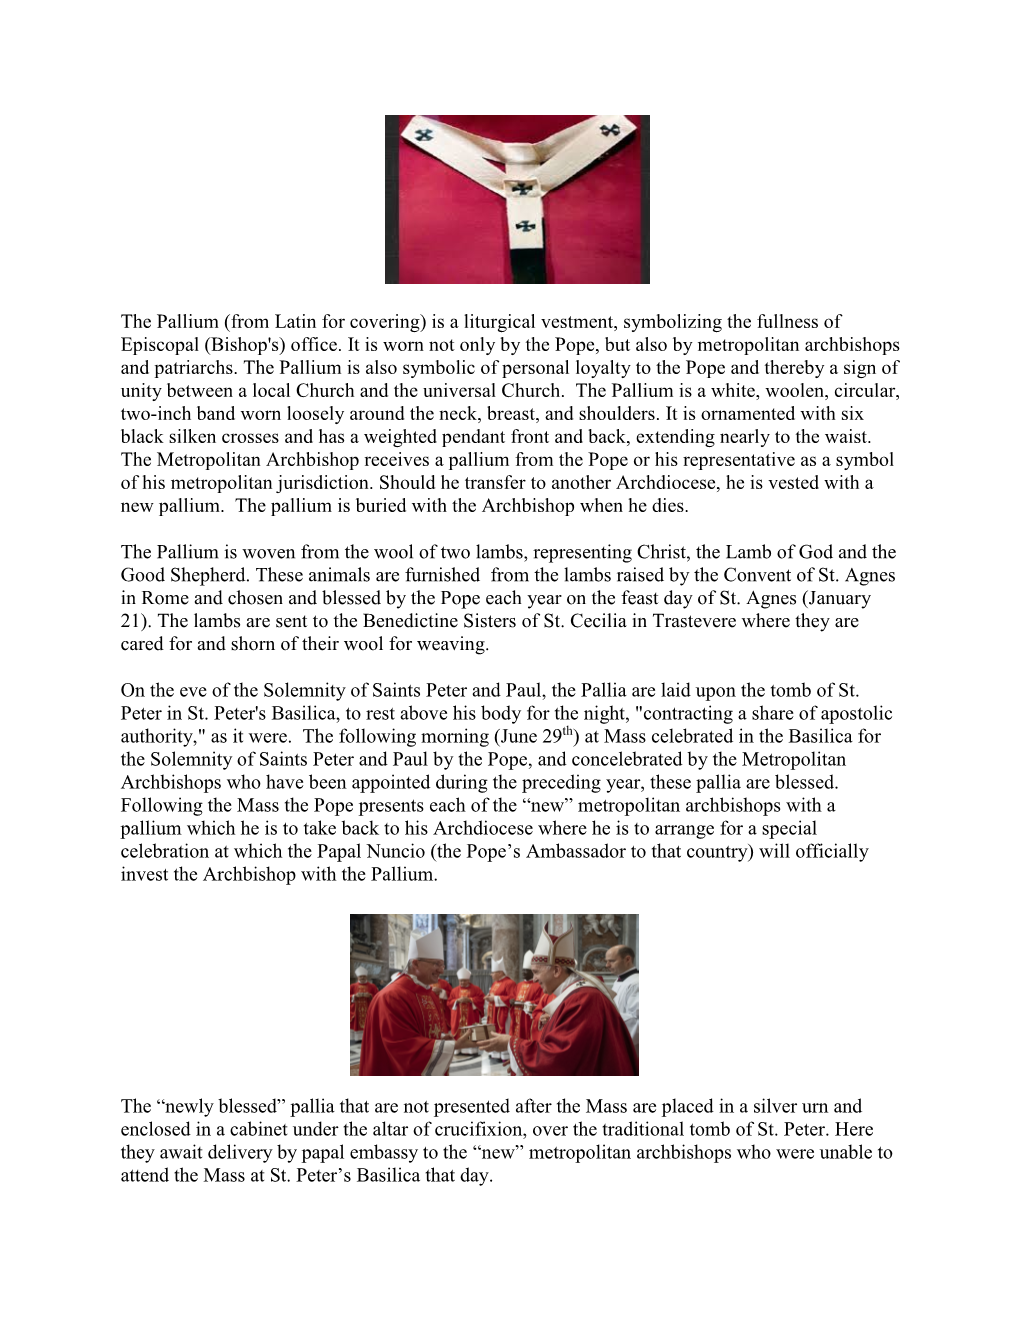 The Pallium (From Latin for Covering) Is a Liturgical Vestment, Symbolizing the Fullness of Episcopal (Bishop's) Office